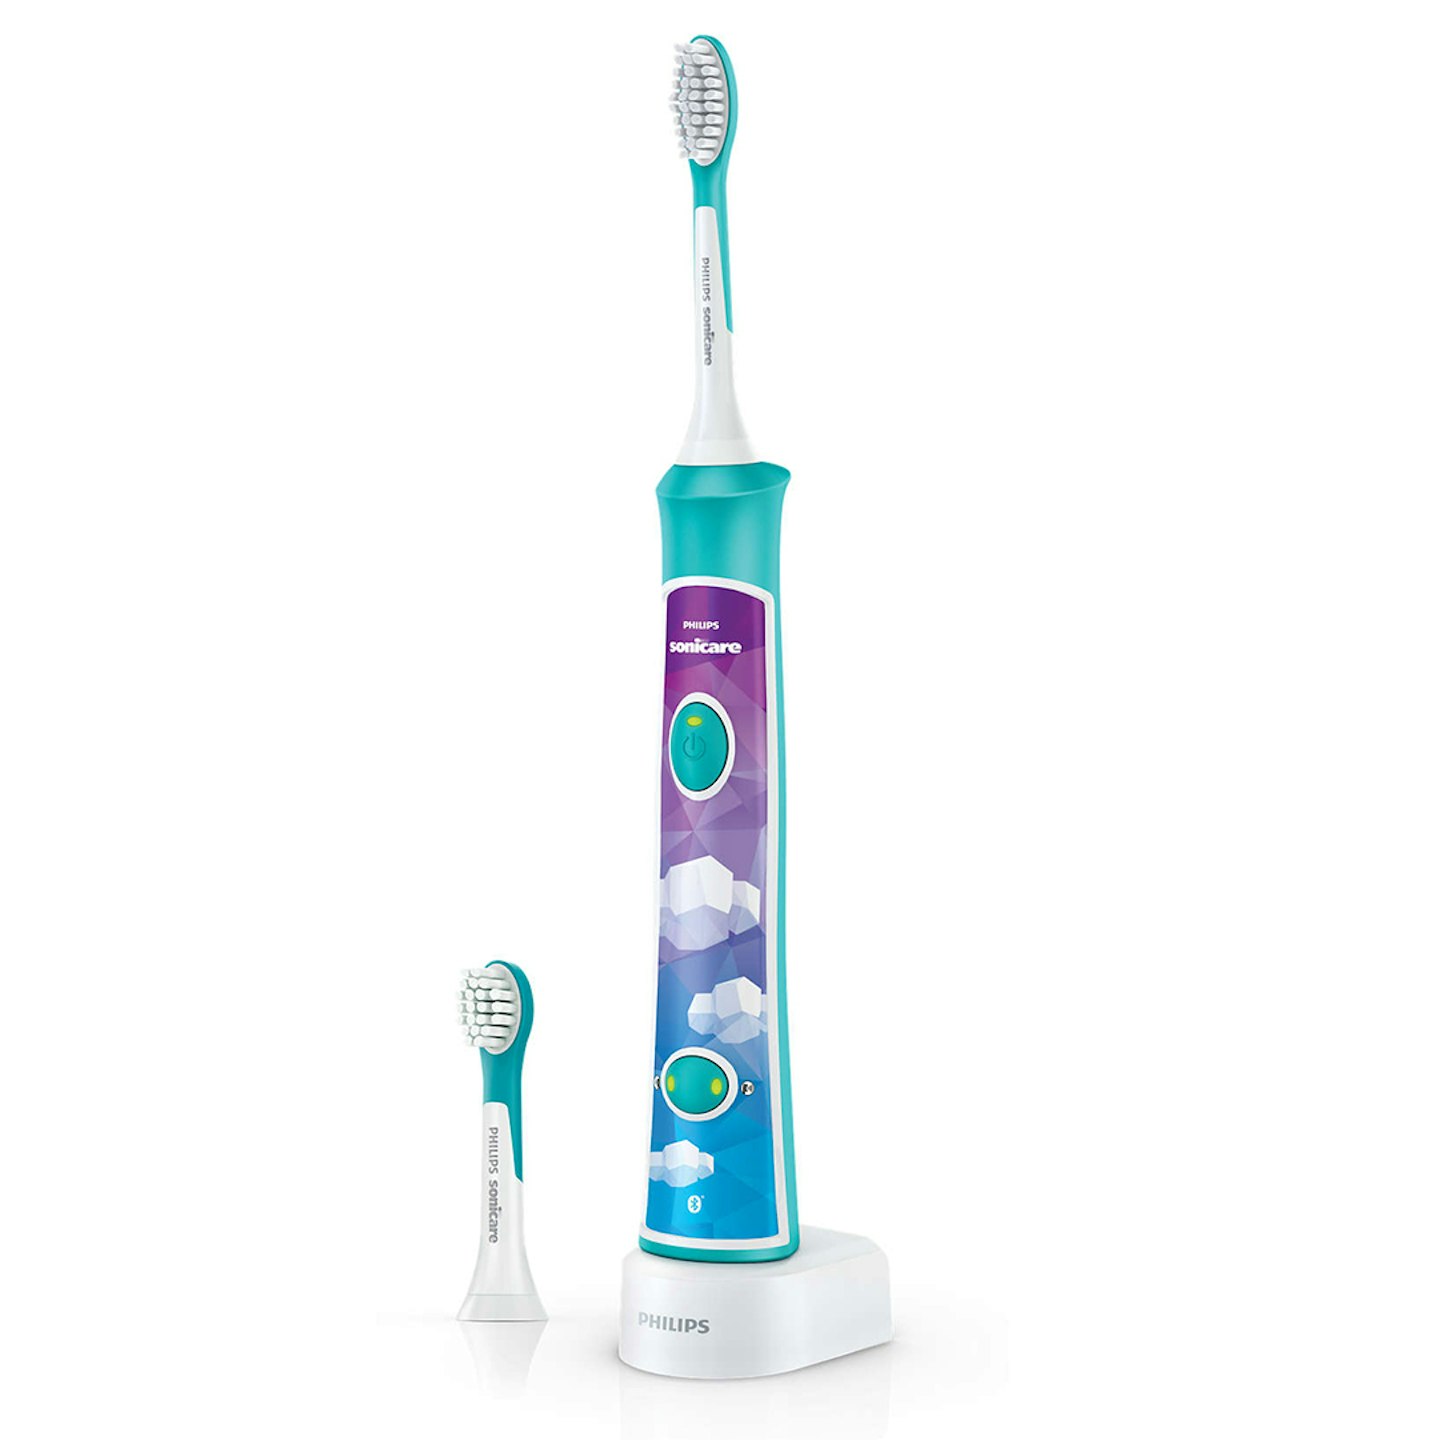 Best toothbrushes for kids Philips Sonicare For Kids Electric Toothbrush Philips Sonicare For Kids Electric Toothbrush 